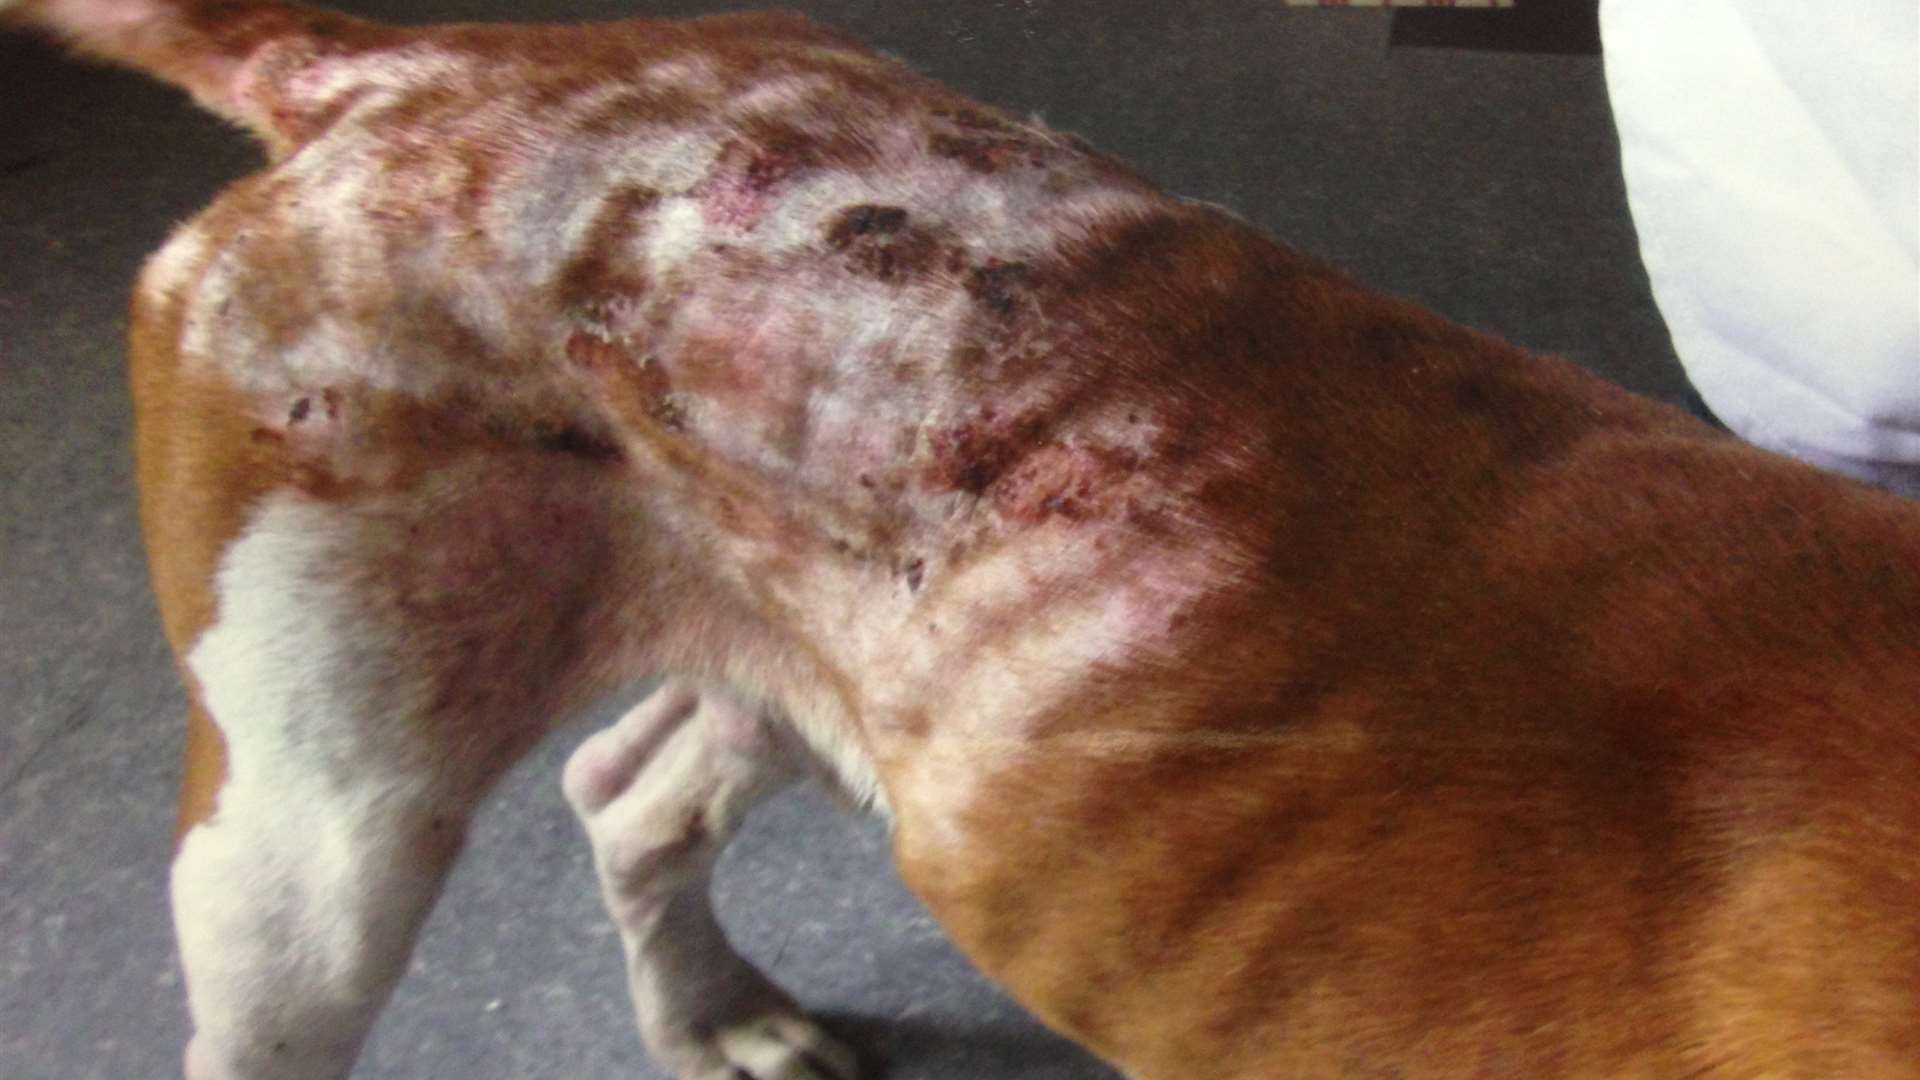 Titan's bad skin condition and under weight state